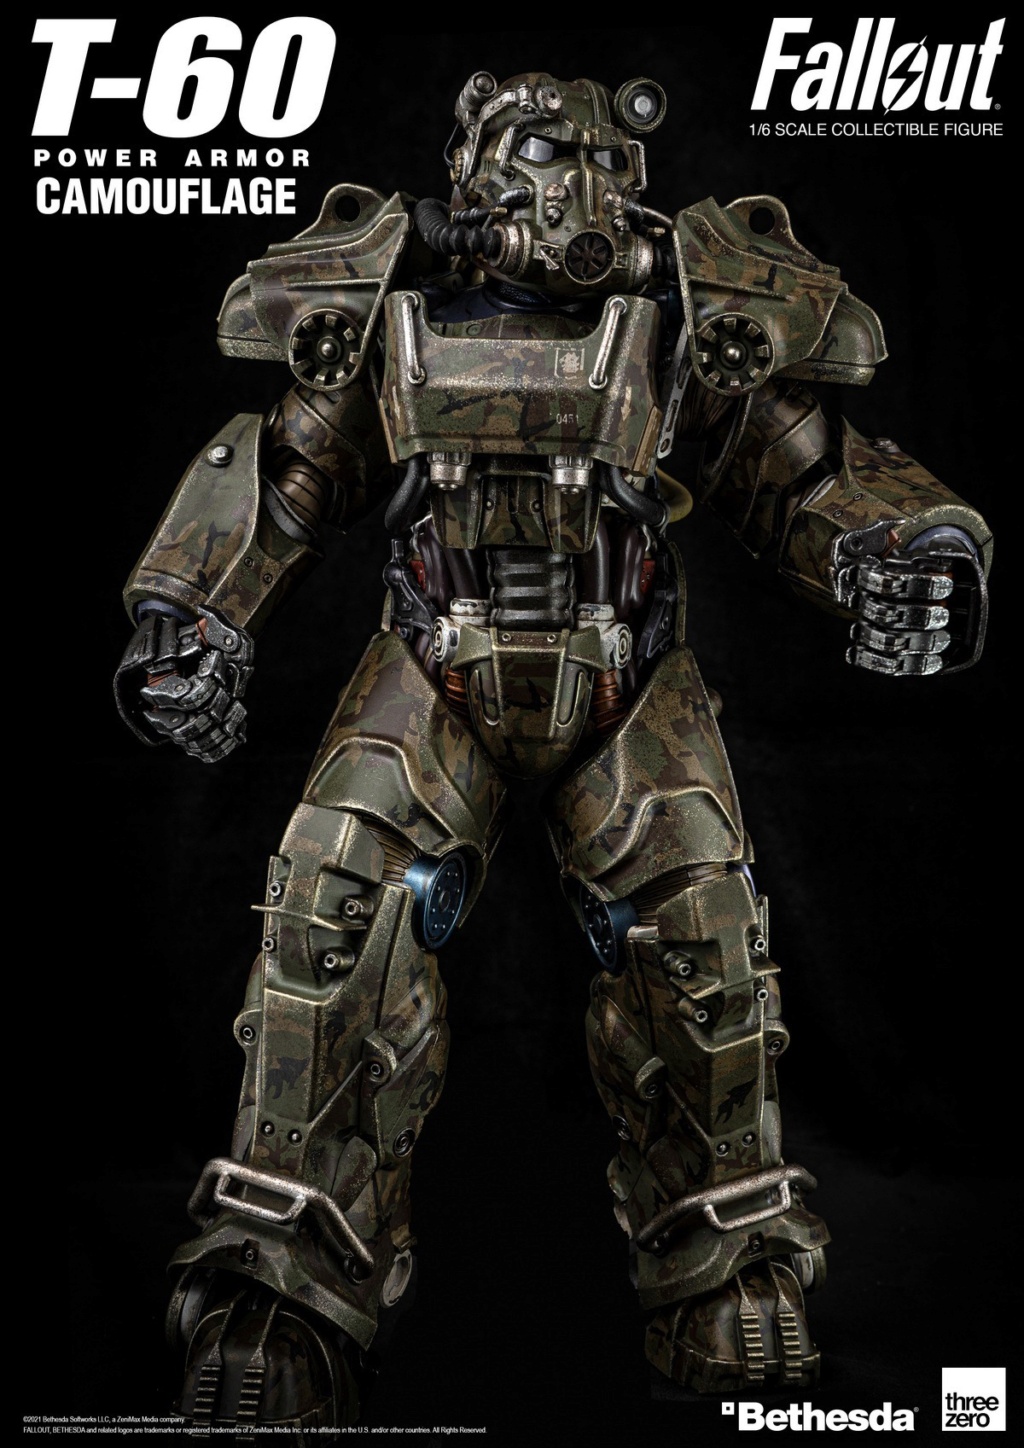 RadiationSeries - NEW PRODUCT: Threezero: 1/6 Fallout: Remaining Dust/Radiation Series-T-60 Power Armor Action Figure Cef2d610